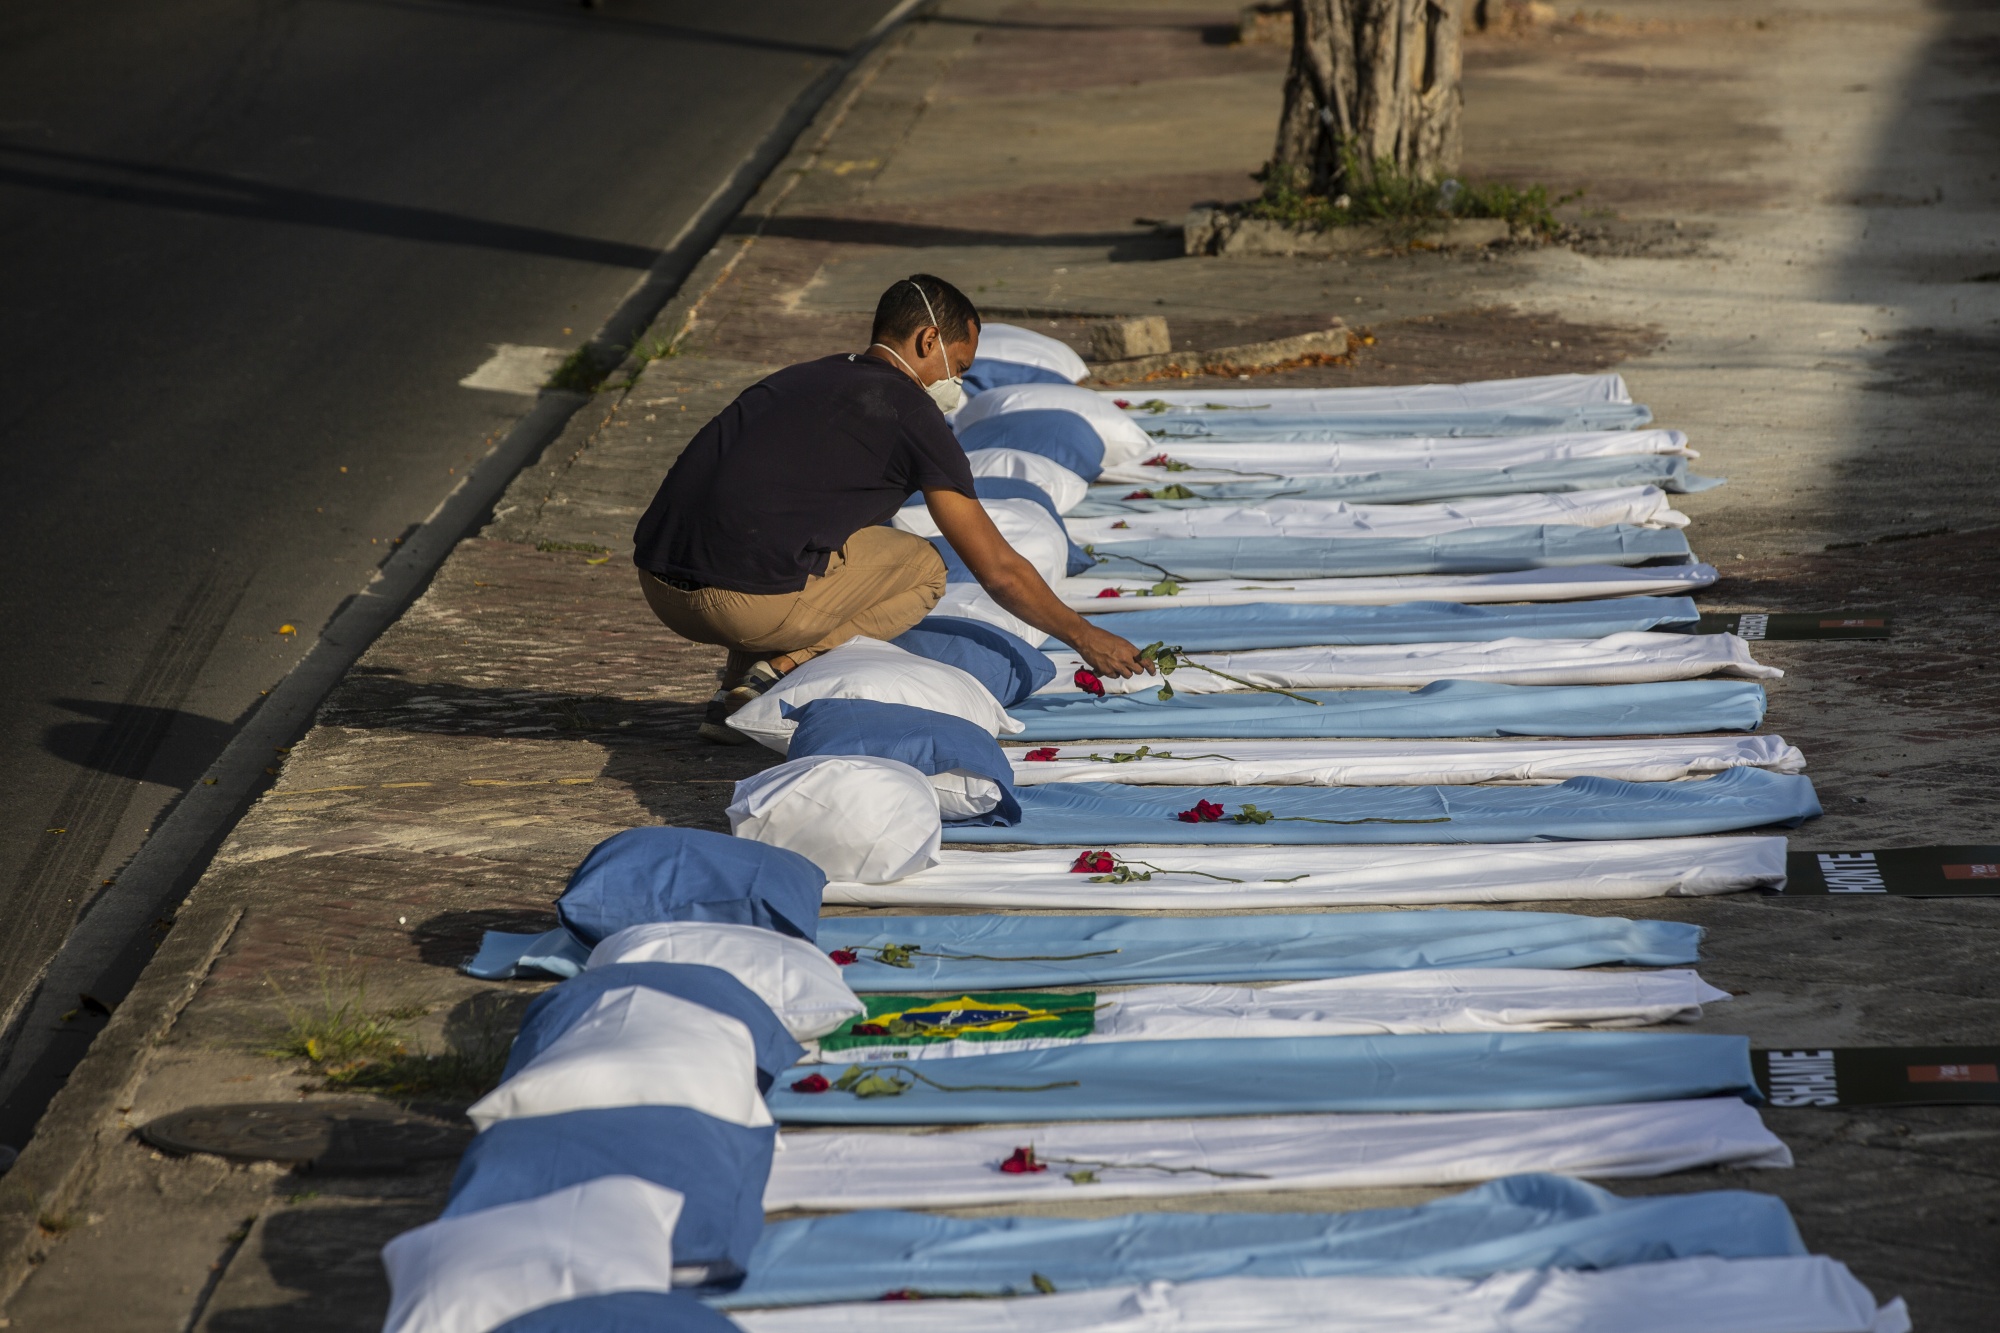 A protester places a rose on a blanket during a protest against the government's pandemic response in front of the Raúl Gazzola hospital in Rio de Janeiro on March 24.